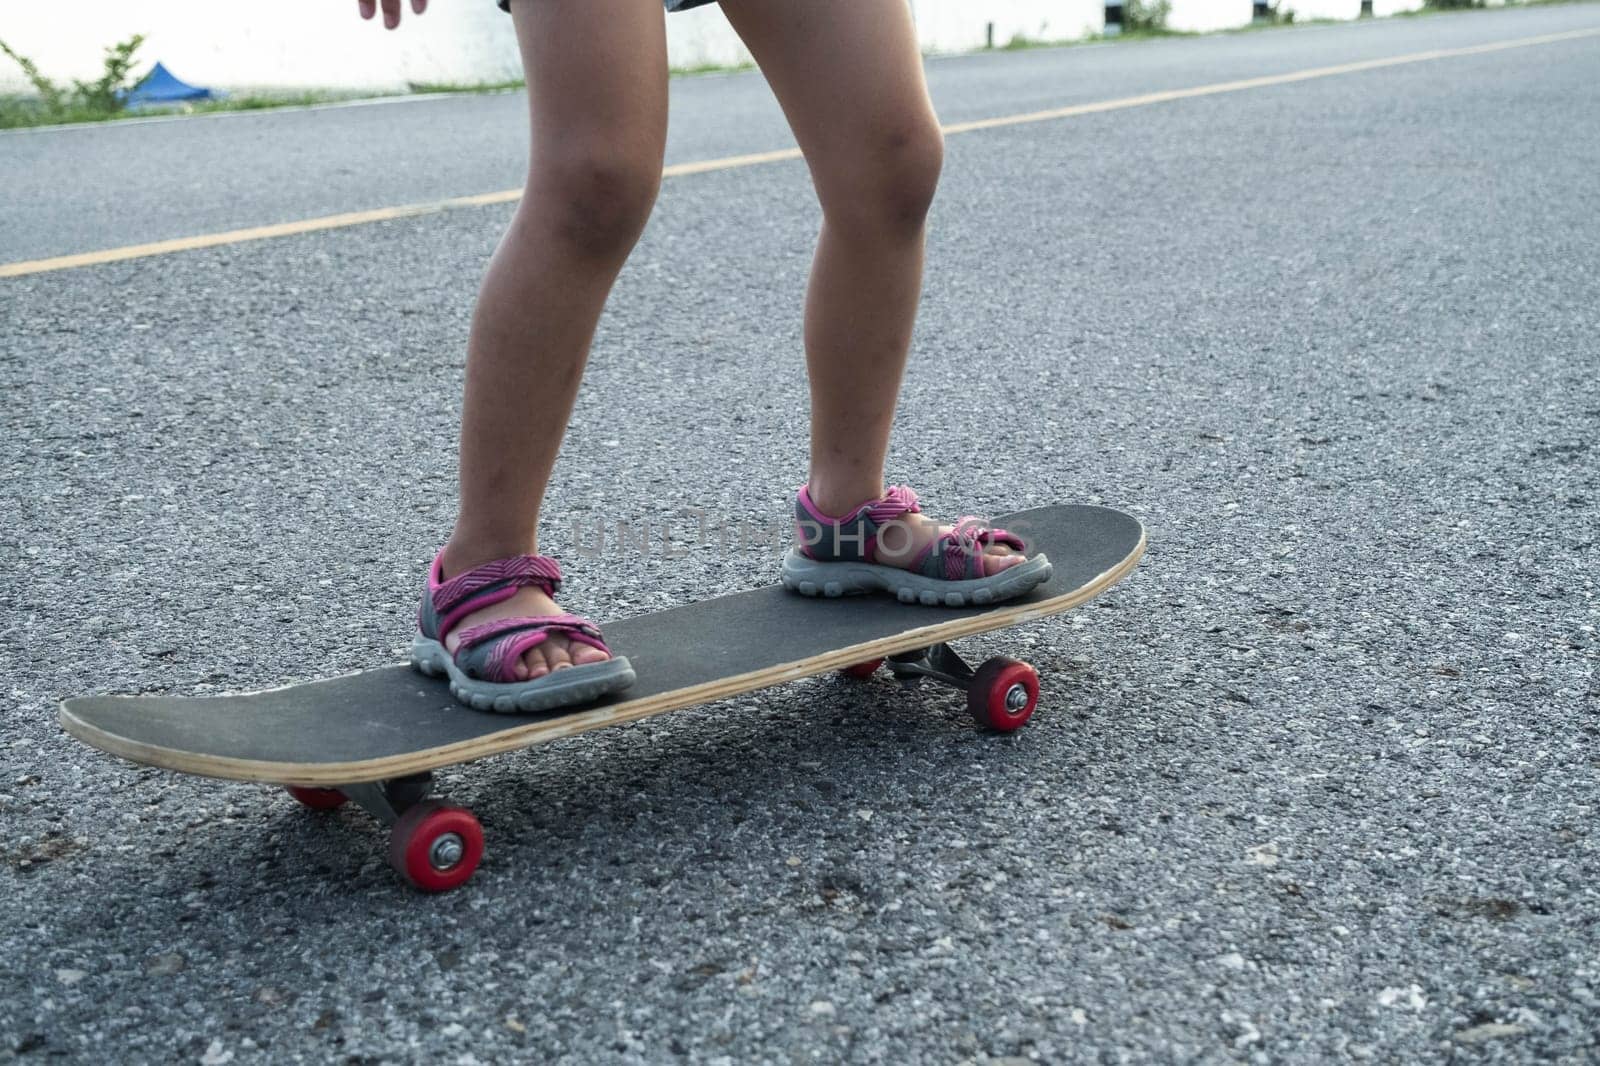 Cute little girl learns how to skateboard at outdoor street, focus on legs standing on board. Healthy sports and outdoor activities for school children in the summer. by TEERASAK